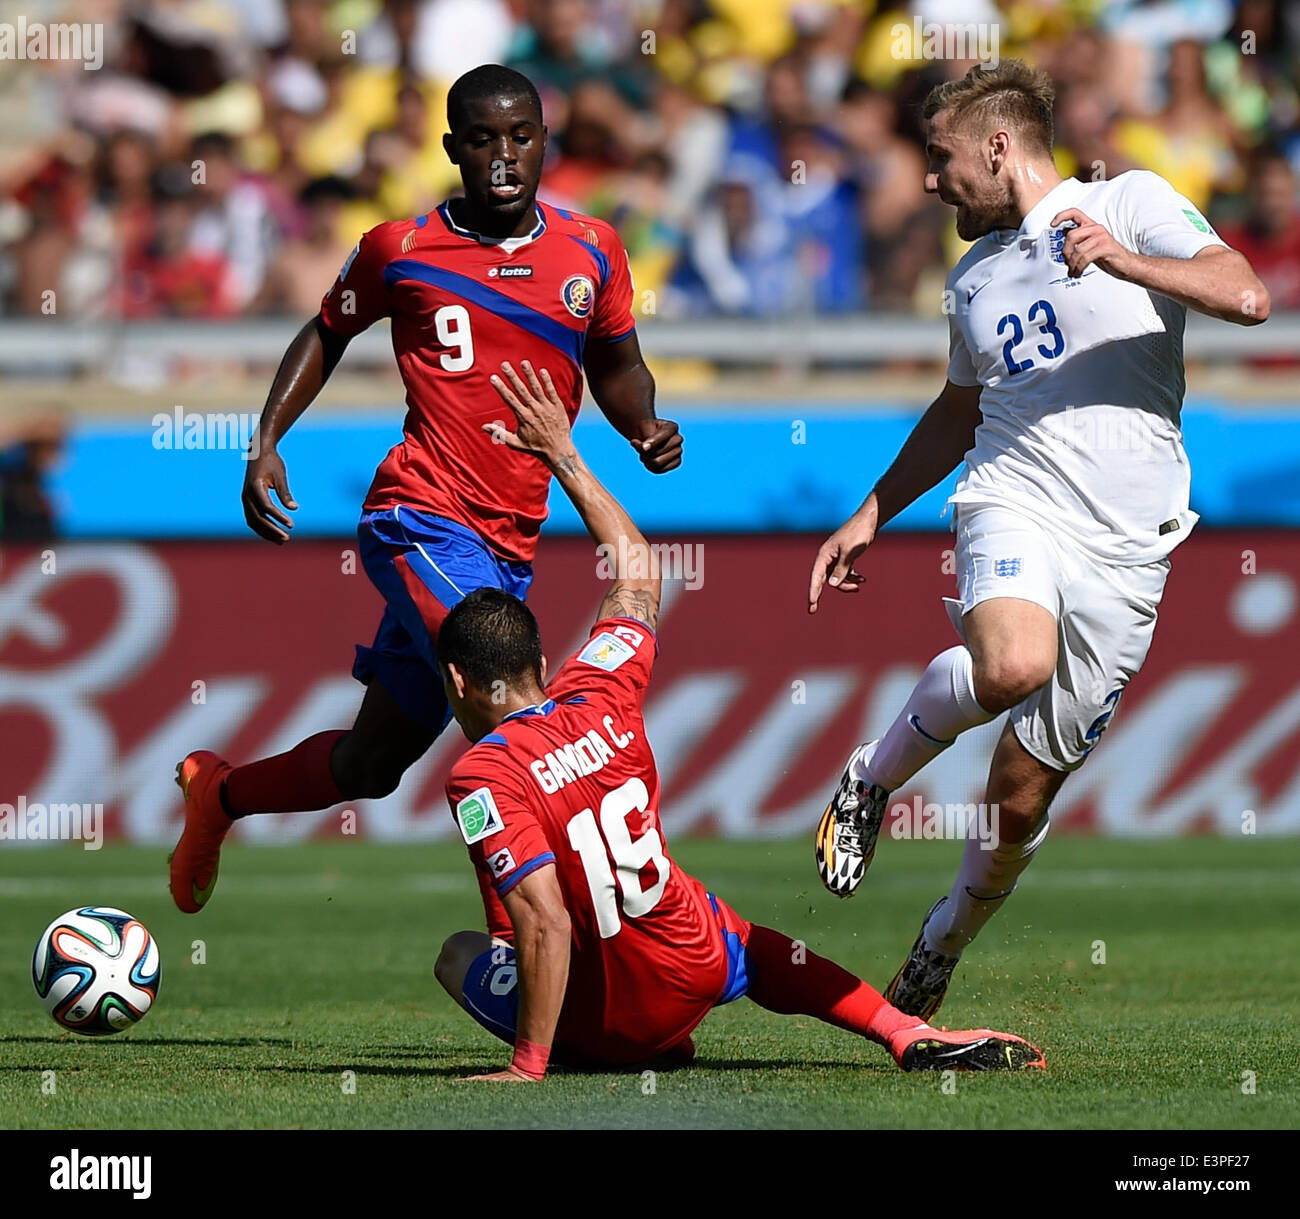 Belo Horizonte, Brazil. 24th June, 2014. England's Luke Shaw (R) vies with Costa Rica's Christian Bolanos (C) during a Group D match between Costa Rica and England of 2014 FIFA World Cup at the Estadio Mineirao Stadium in Belo Horizonte, Brazil, on June 24, 2014. England drew 0-0 with Costa Rica on Tuesday. © Qi Heng/Xinhua/Alamy Live News Stock Photo